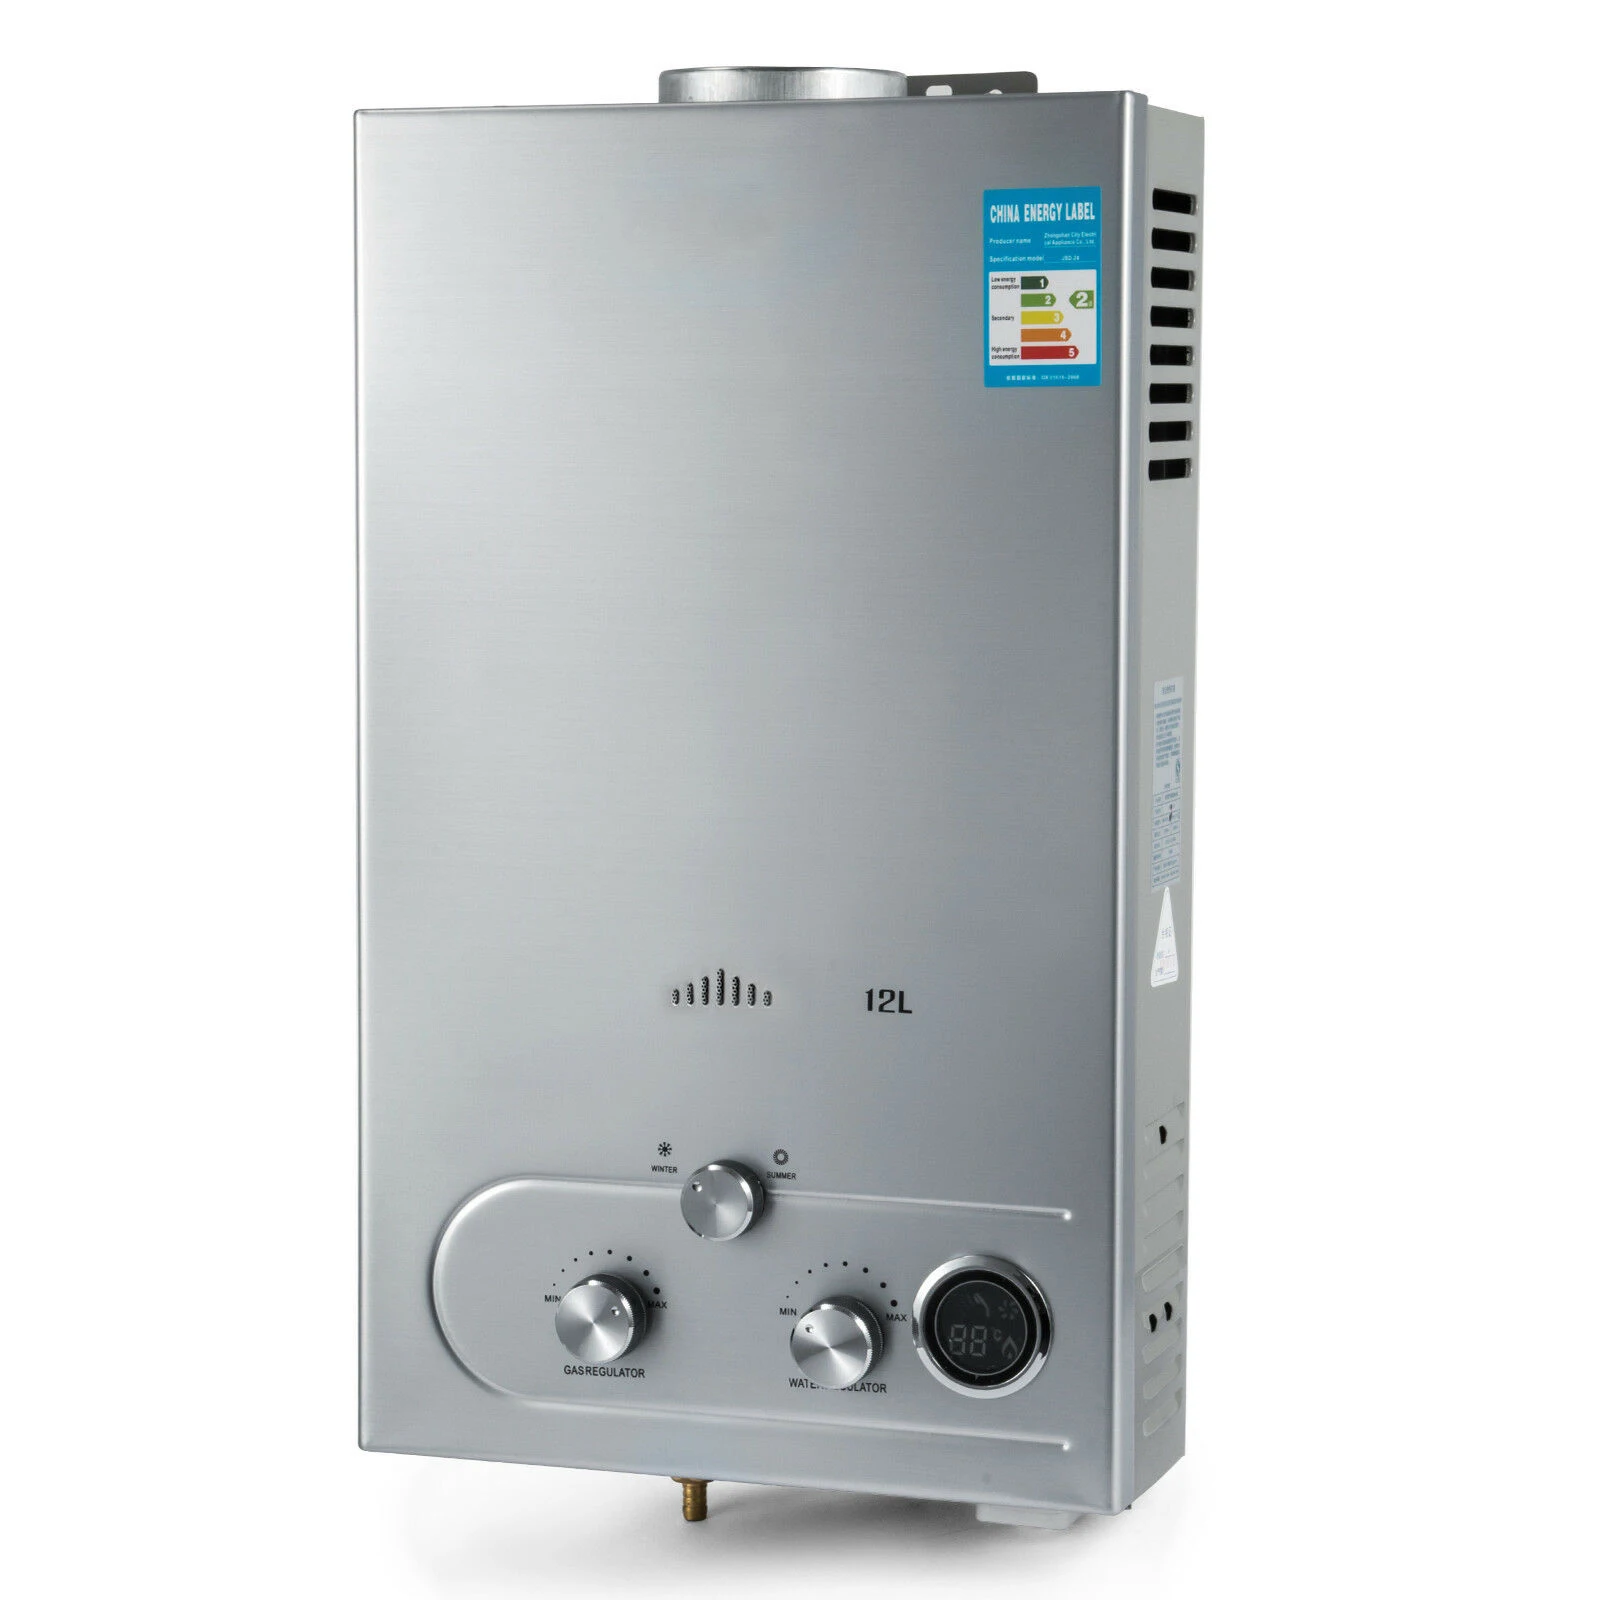 
Propane 18L Gas LPG Tankless Instant Hot Water Heater Boiler 36KW 4.8GPM Liquefied Gas Water Heater 